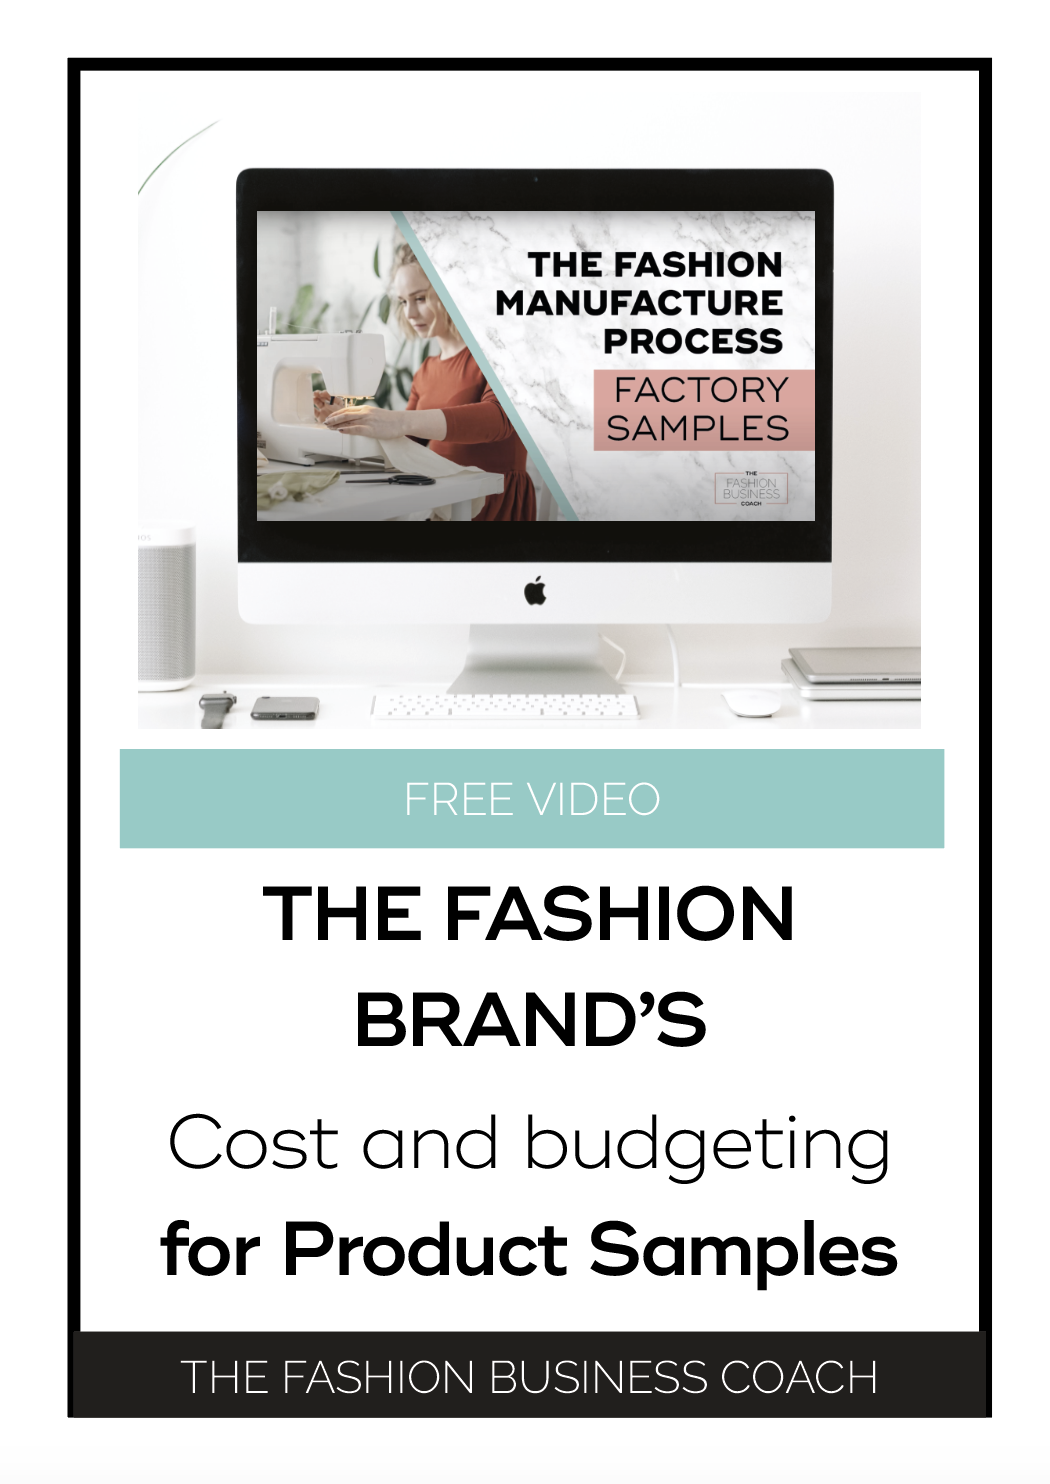 The Fashion Brand’s Cost and Budgeting for Product Samples 4.png